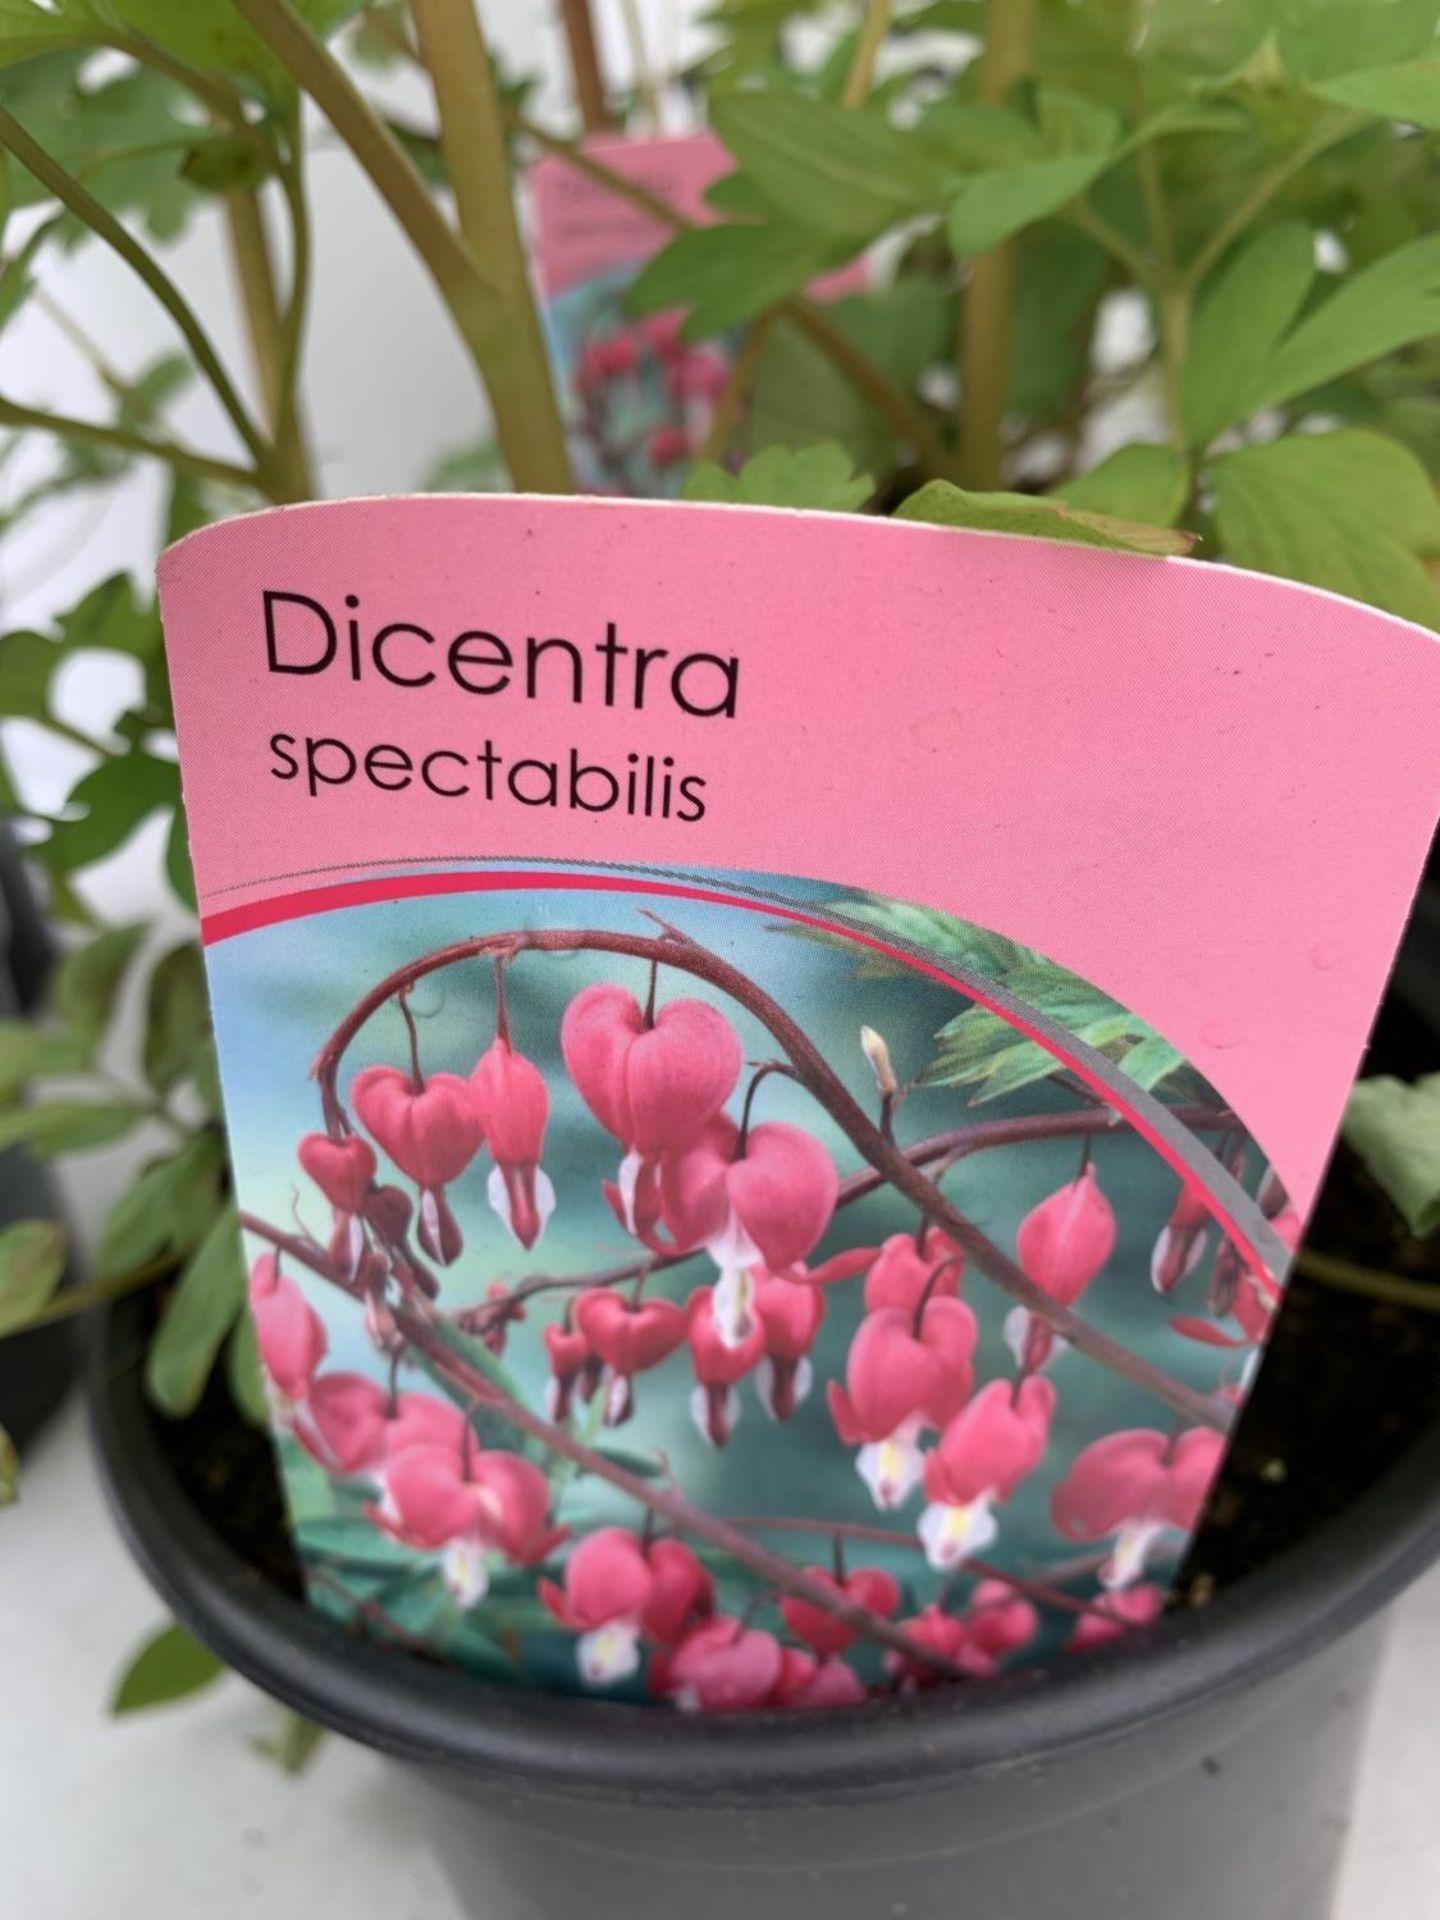 SIX DICENTRA SPECTABILIS BLEEDING HEART 50CM TALL IN 2 LTR POTS TO BE SOLD FOR THE SIX PLUS VAT - Image 9 of 9